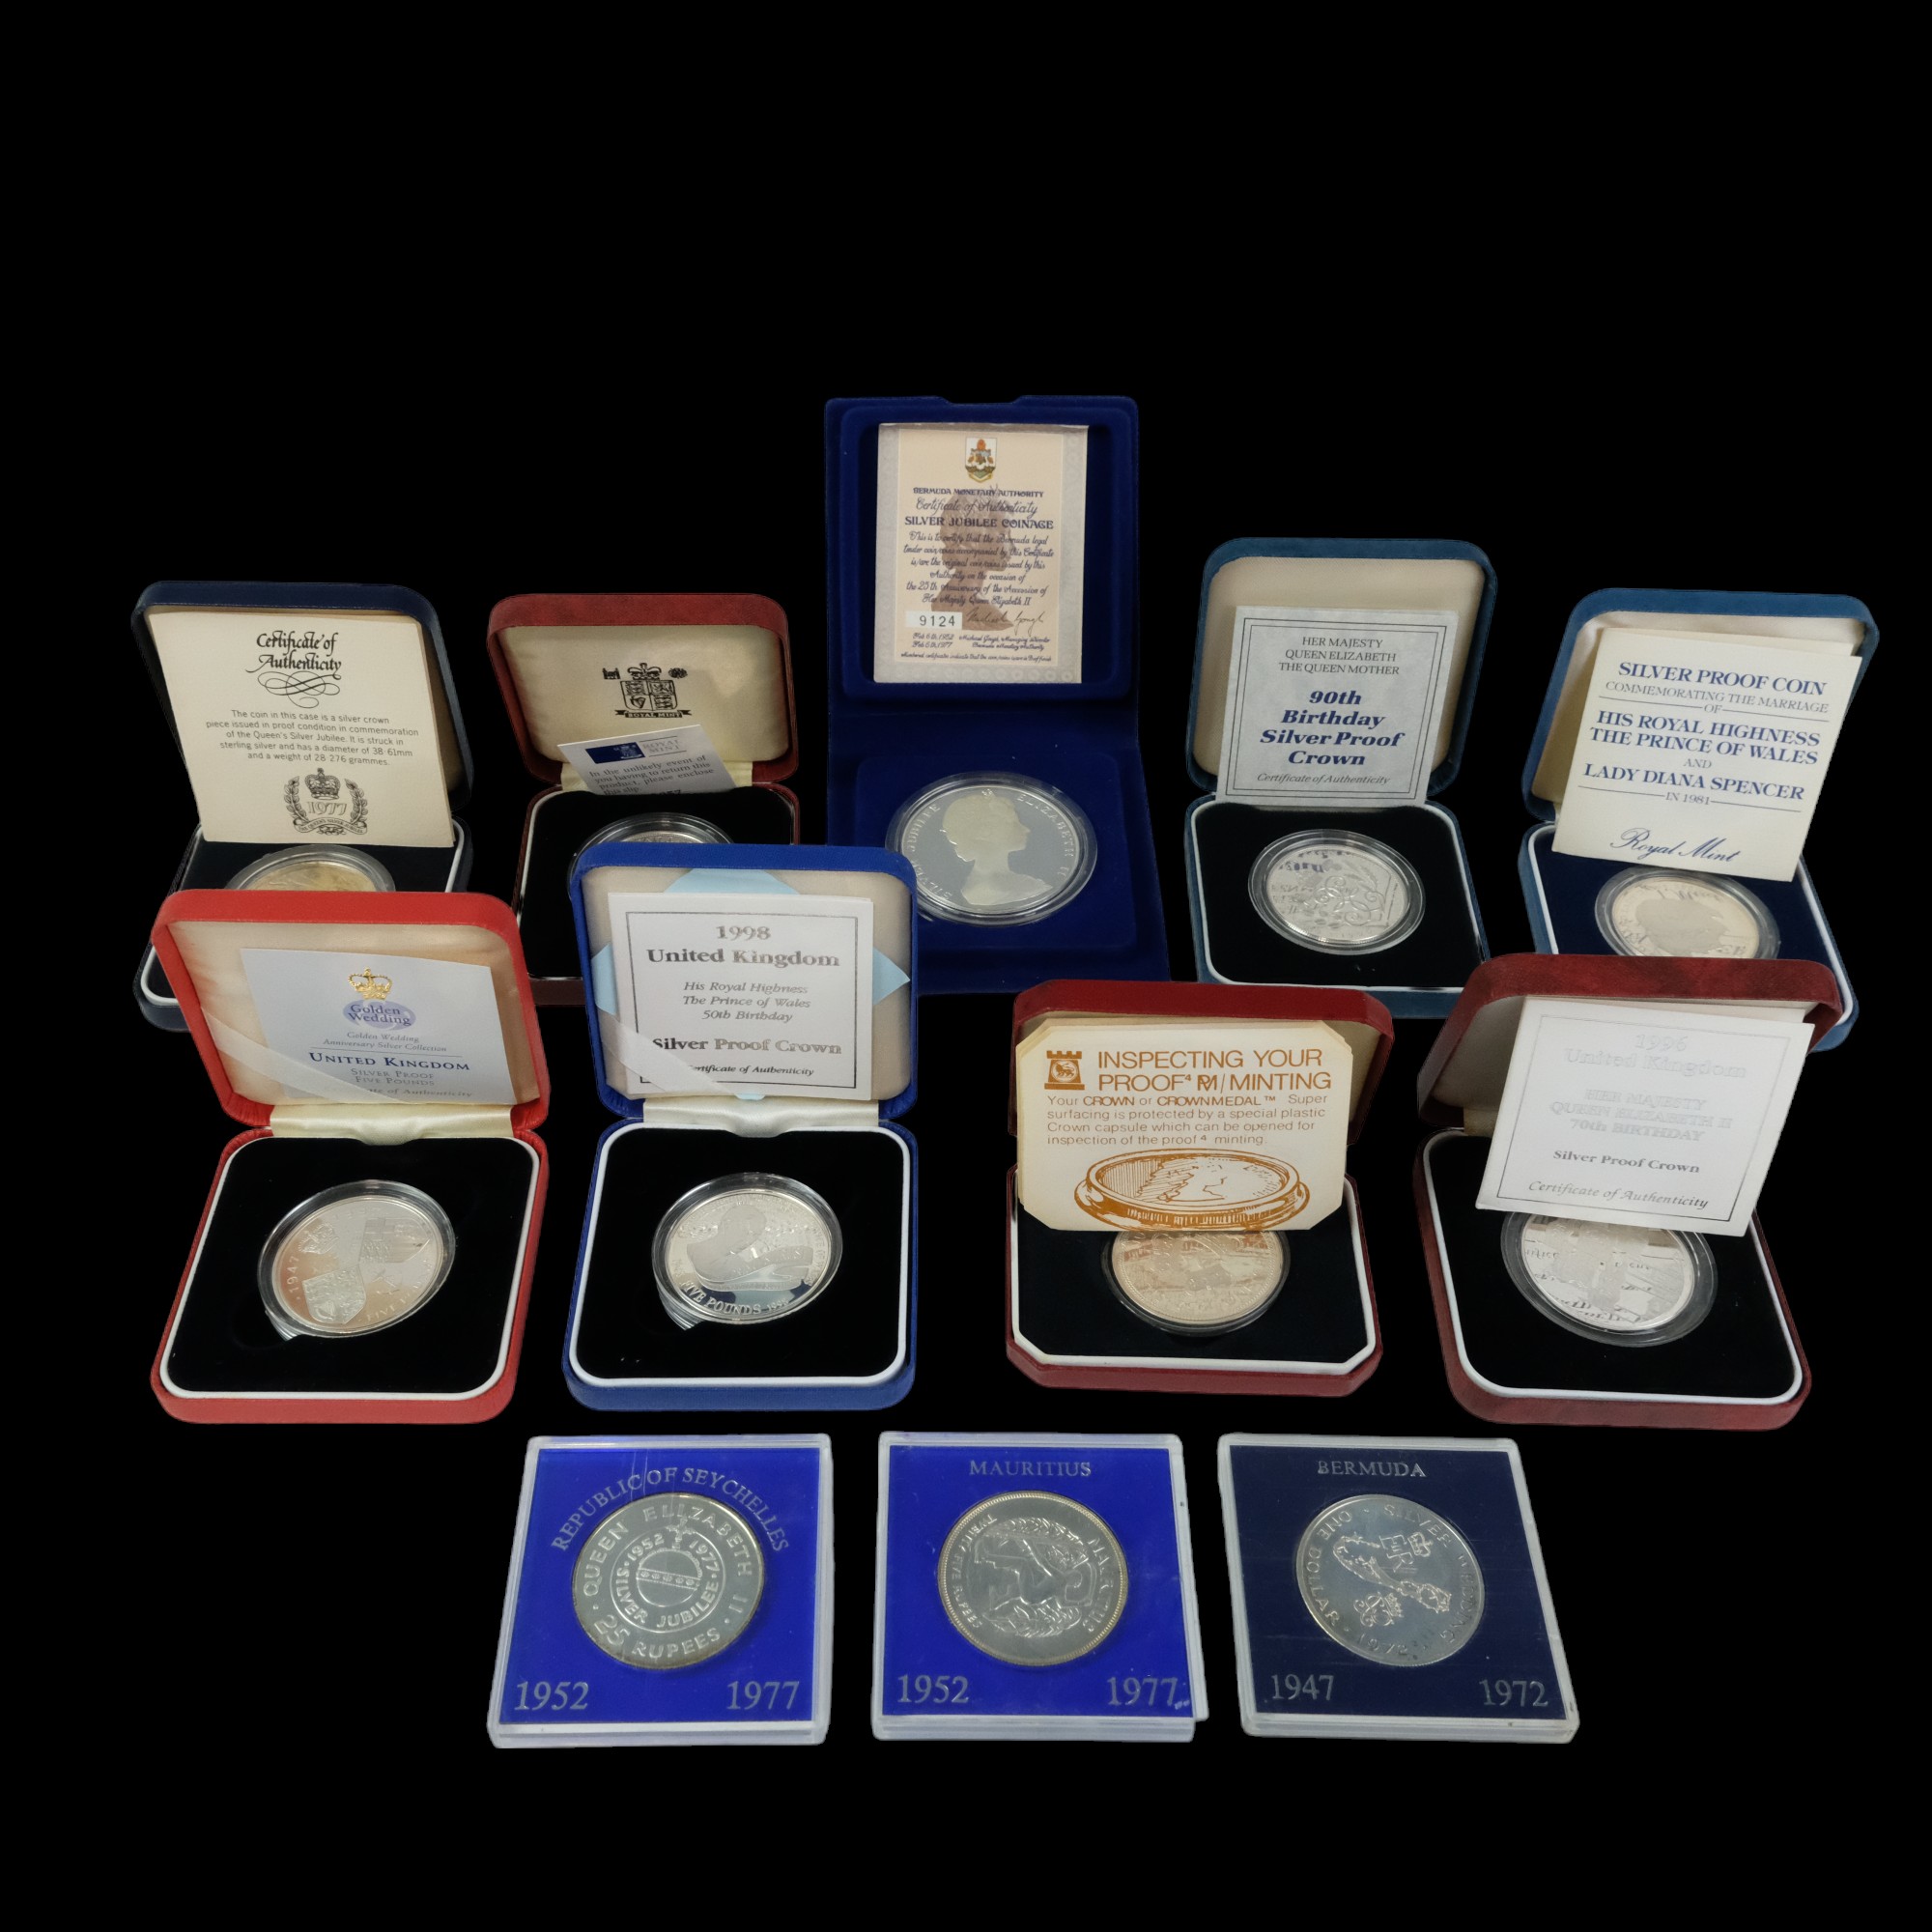 A group of silver proof royal commemorative coins including a 1996 70th Birthday crown, 1981 royal